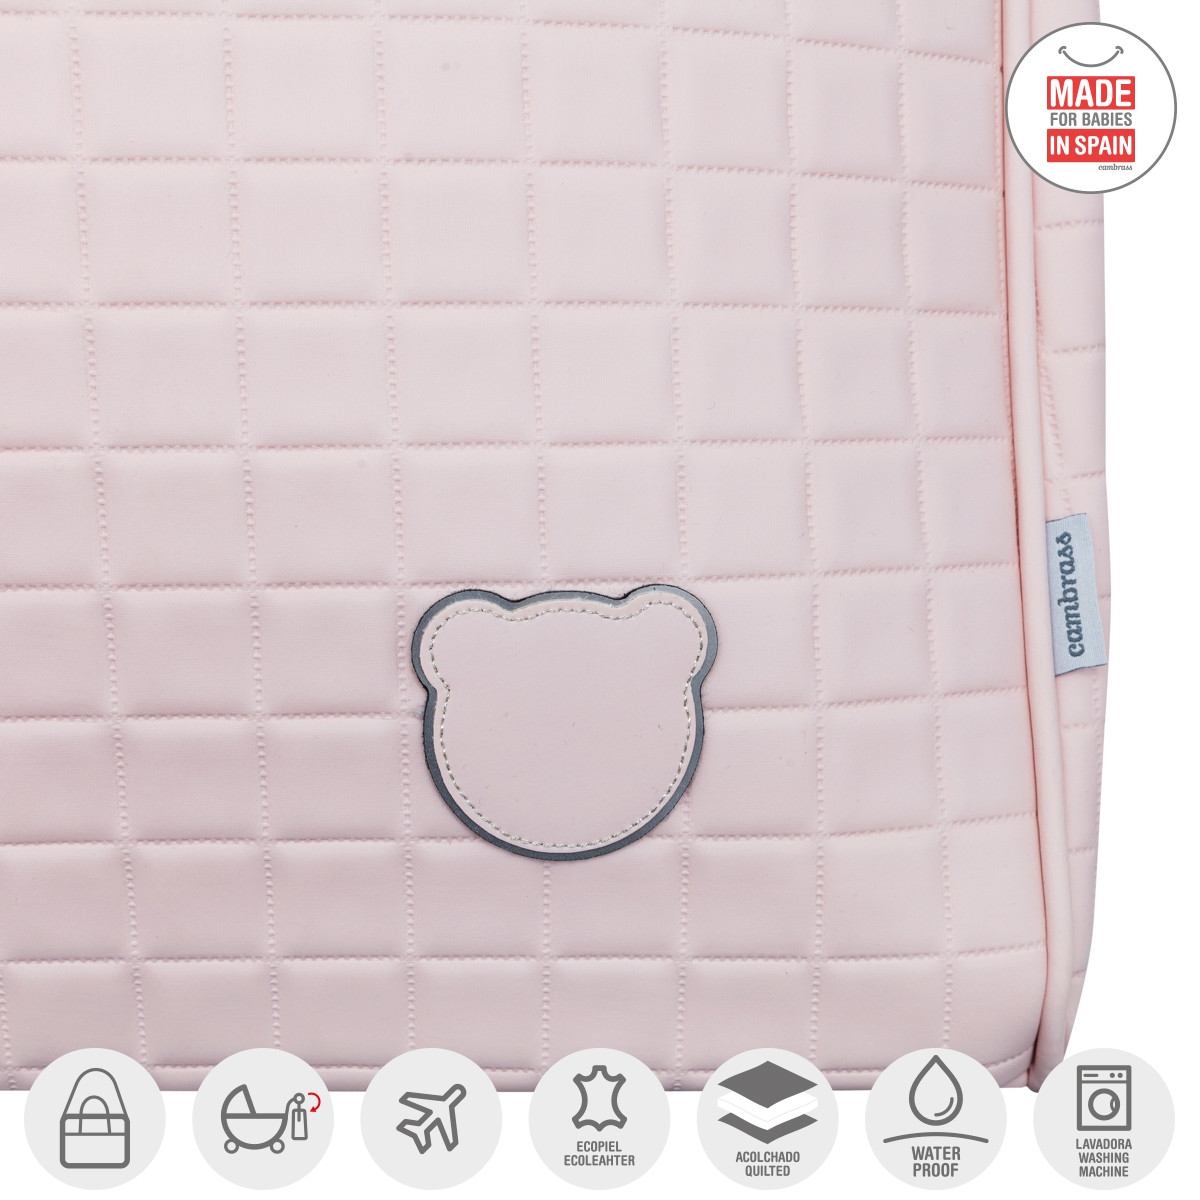 MATERNITY BAG GOFRE PINK 20x44x33 CM CAMBRASS - 4